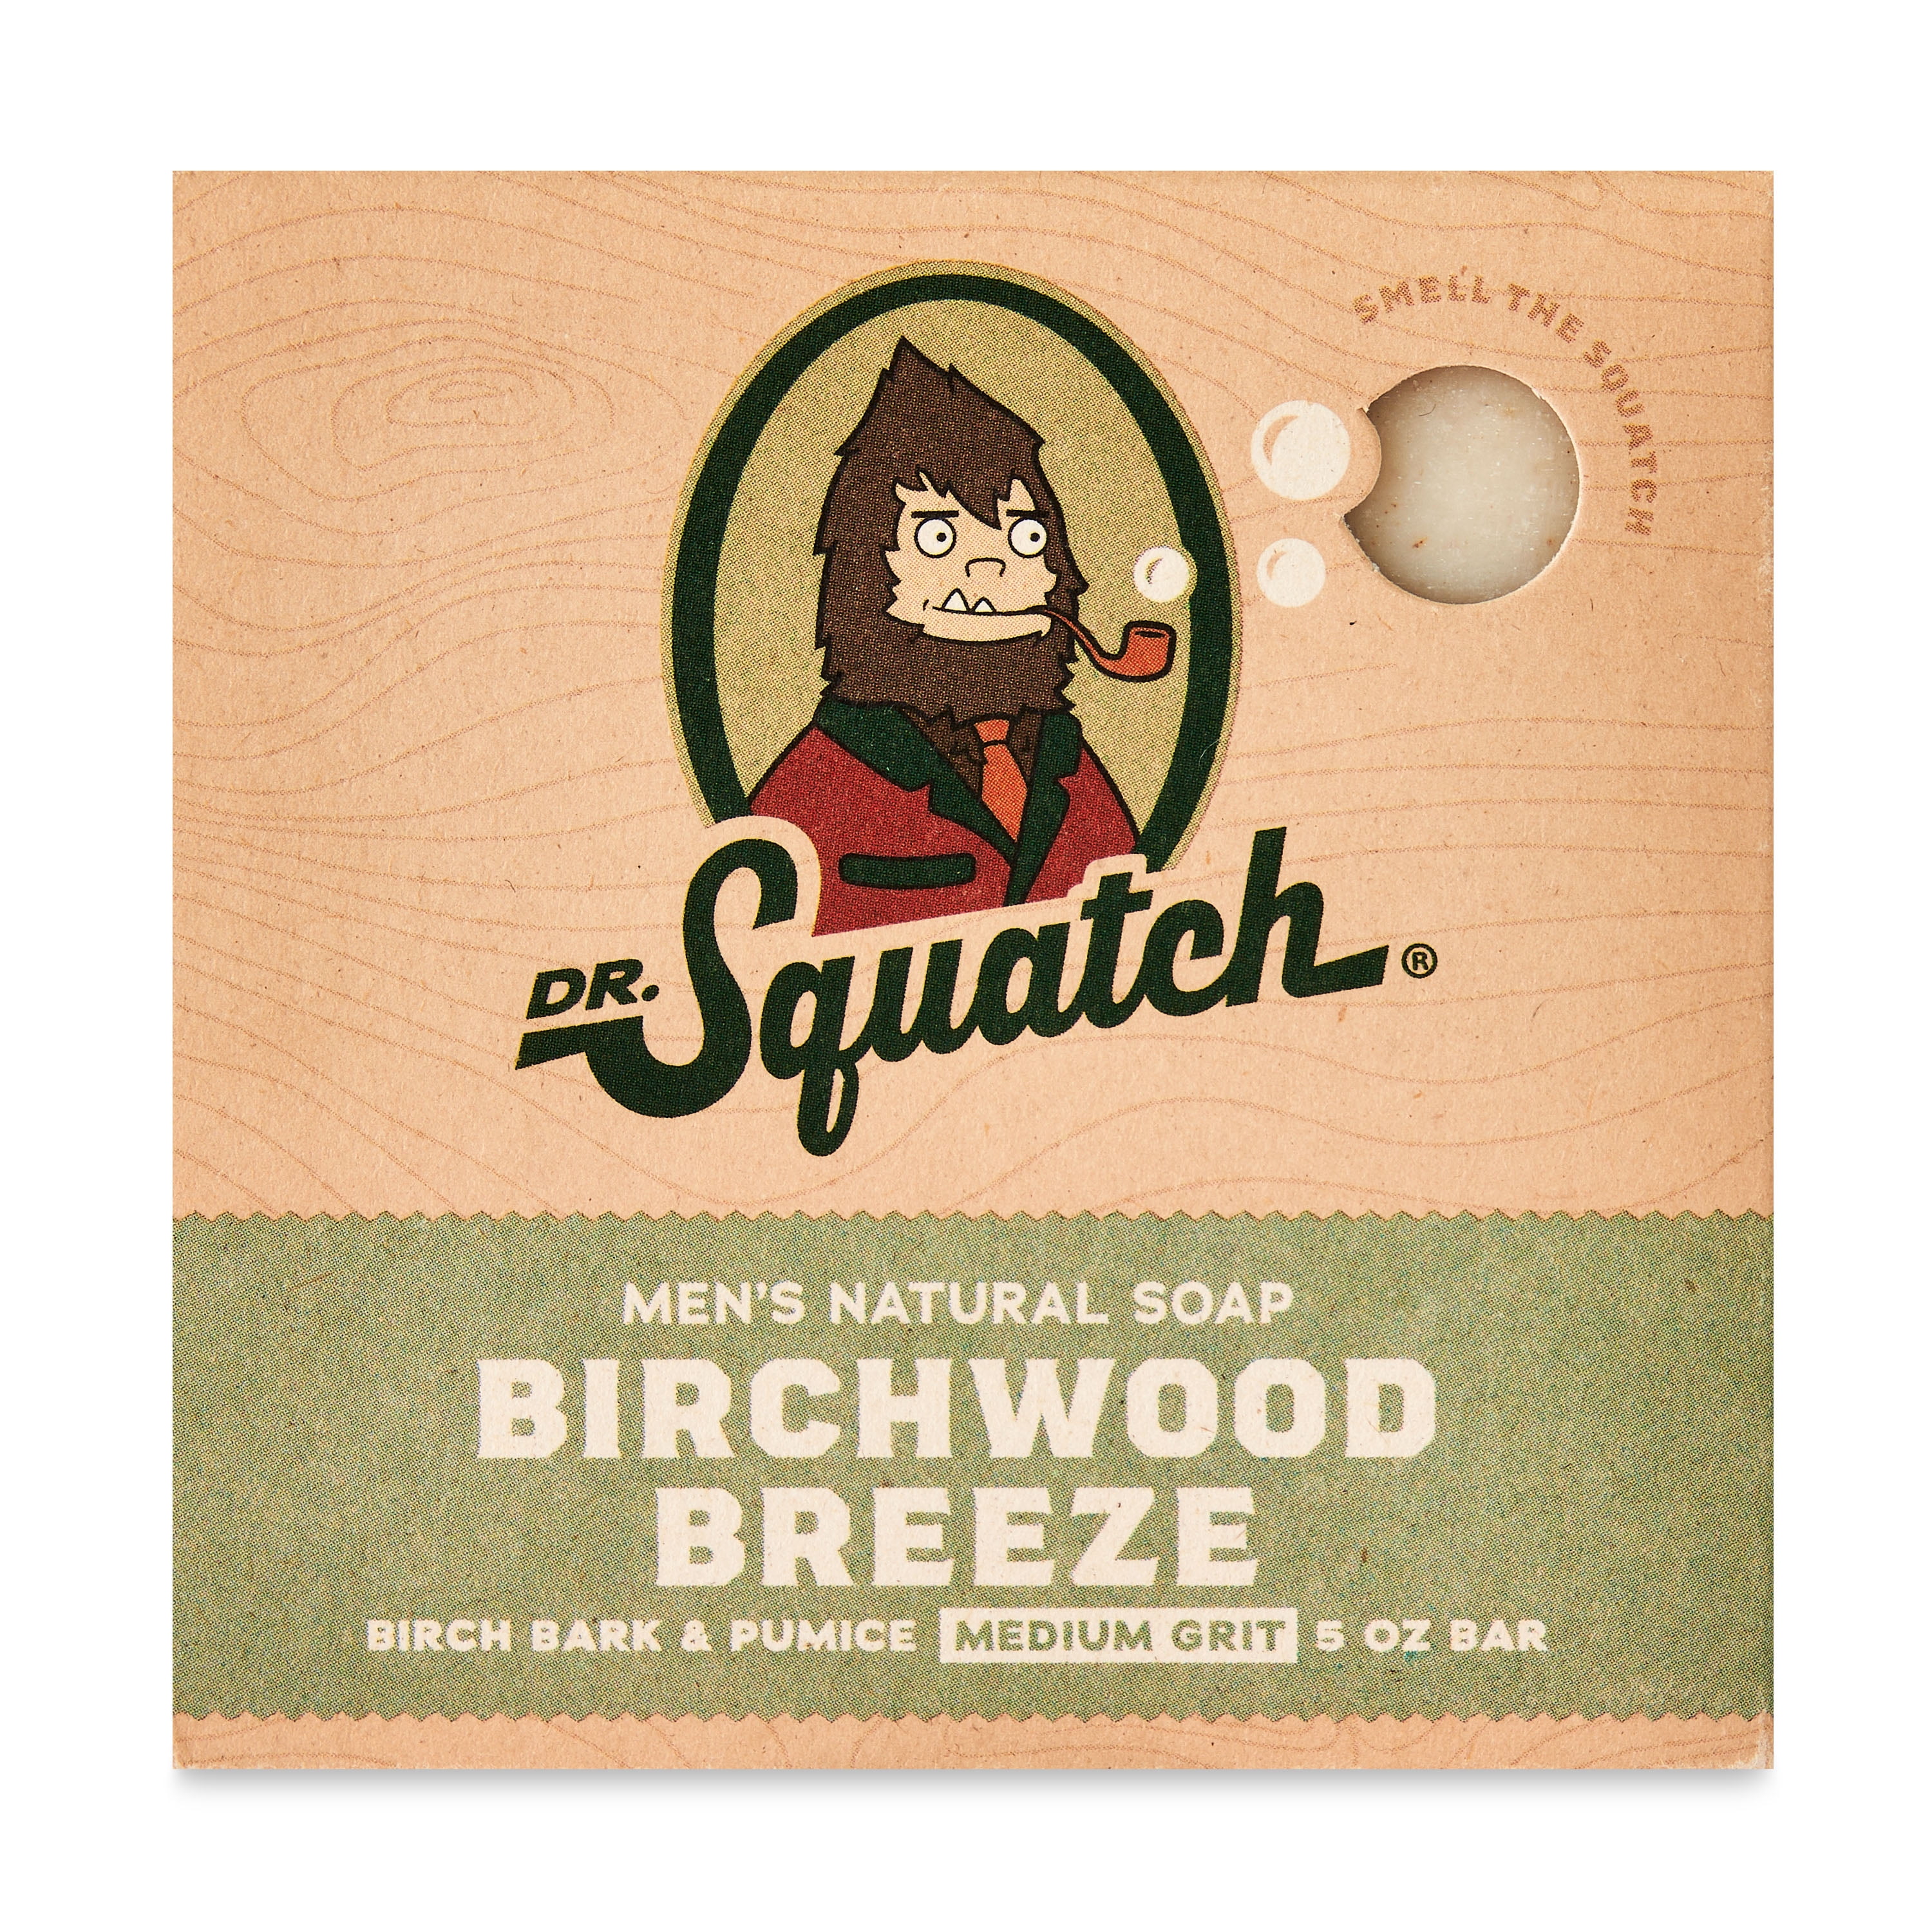 DR. SQUATCH SOAP SAVER, FREE SHIPPING